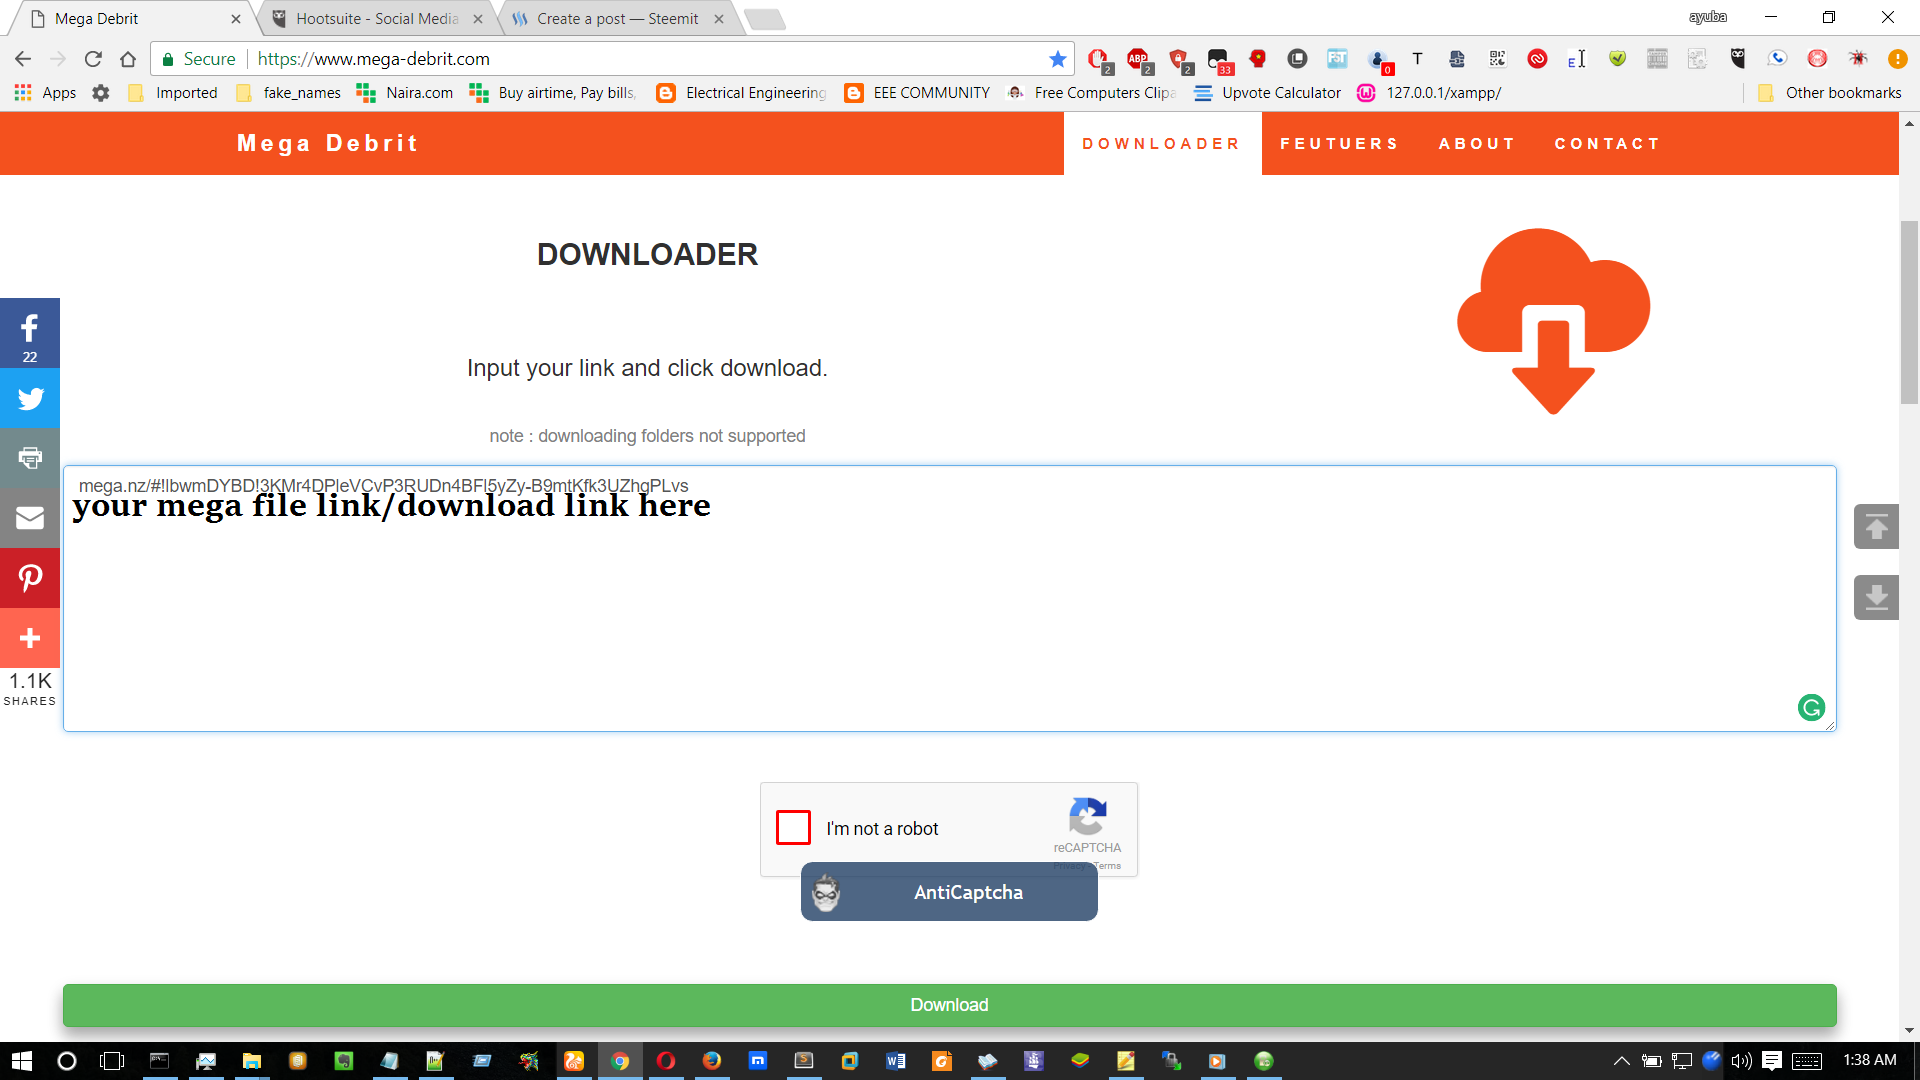 HOW TO DOWNLOAD WITH ANY DOWNLOADER ON MEGA — Steemit